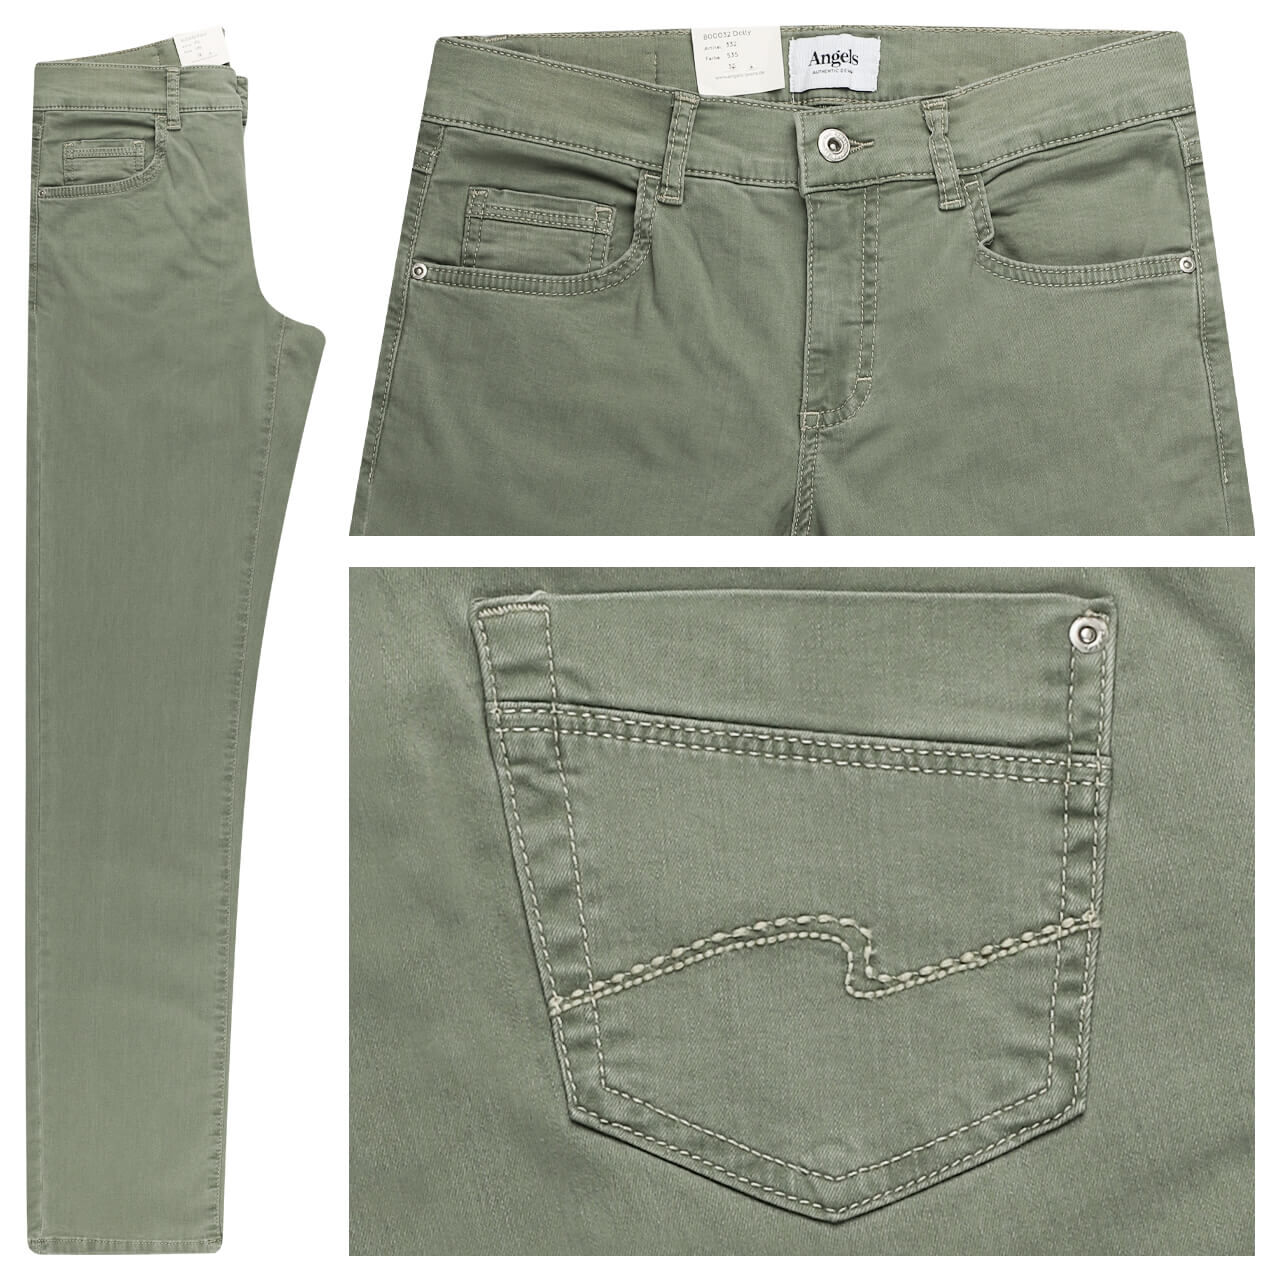 Angels Dolly Jeans eucalyptus green